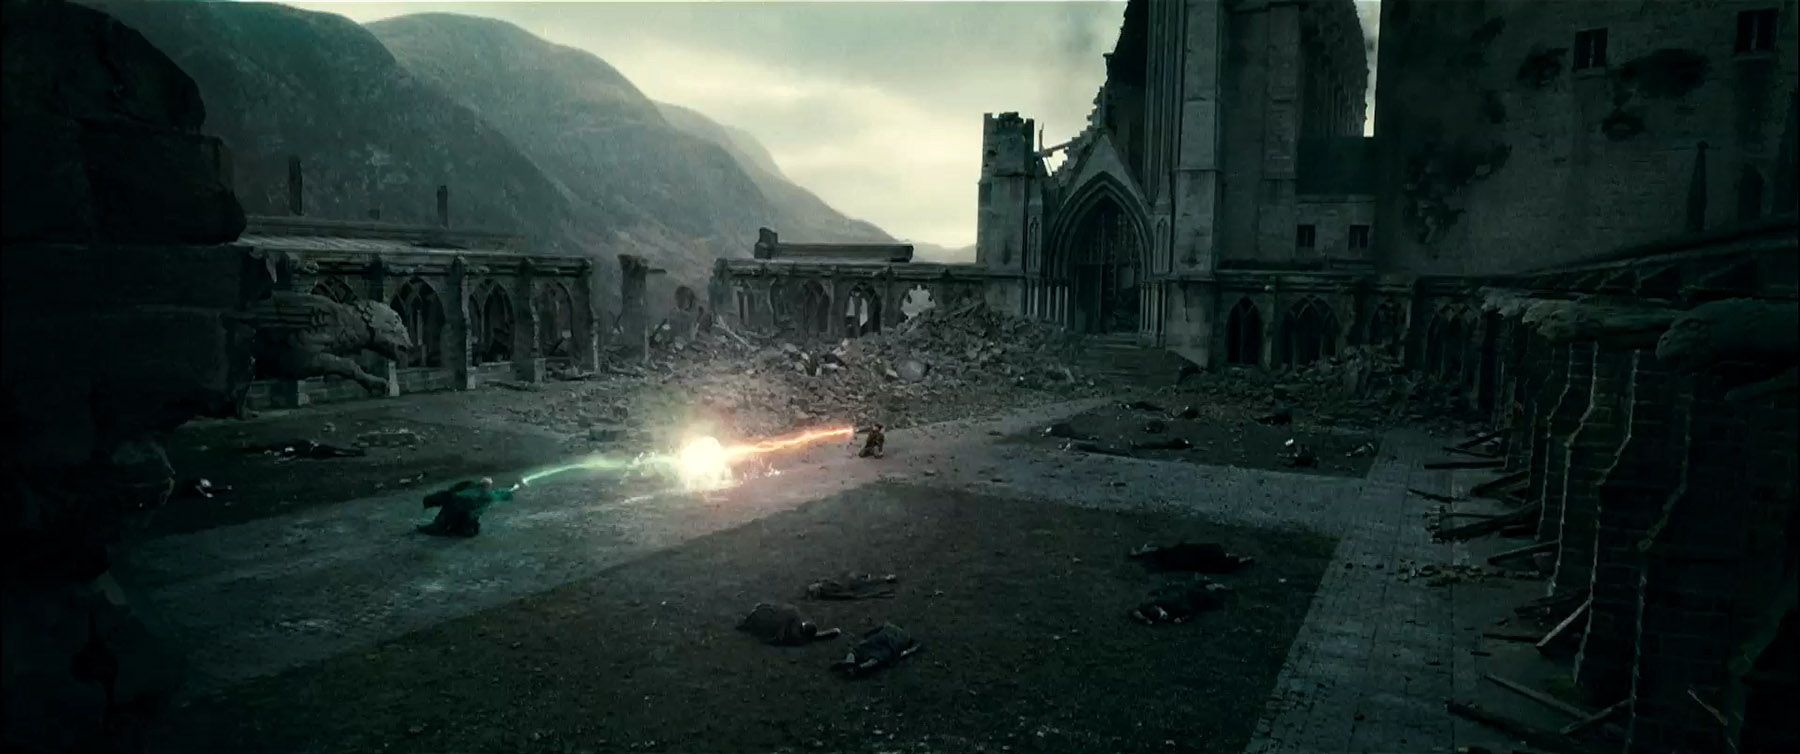 Harry and Voldemort have a climactic duel in Hogwarts courtyard